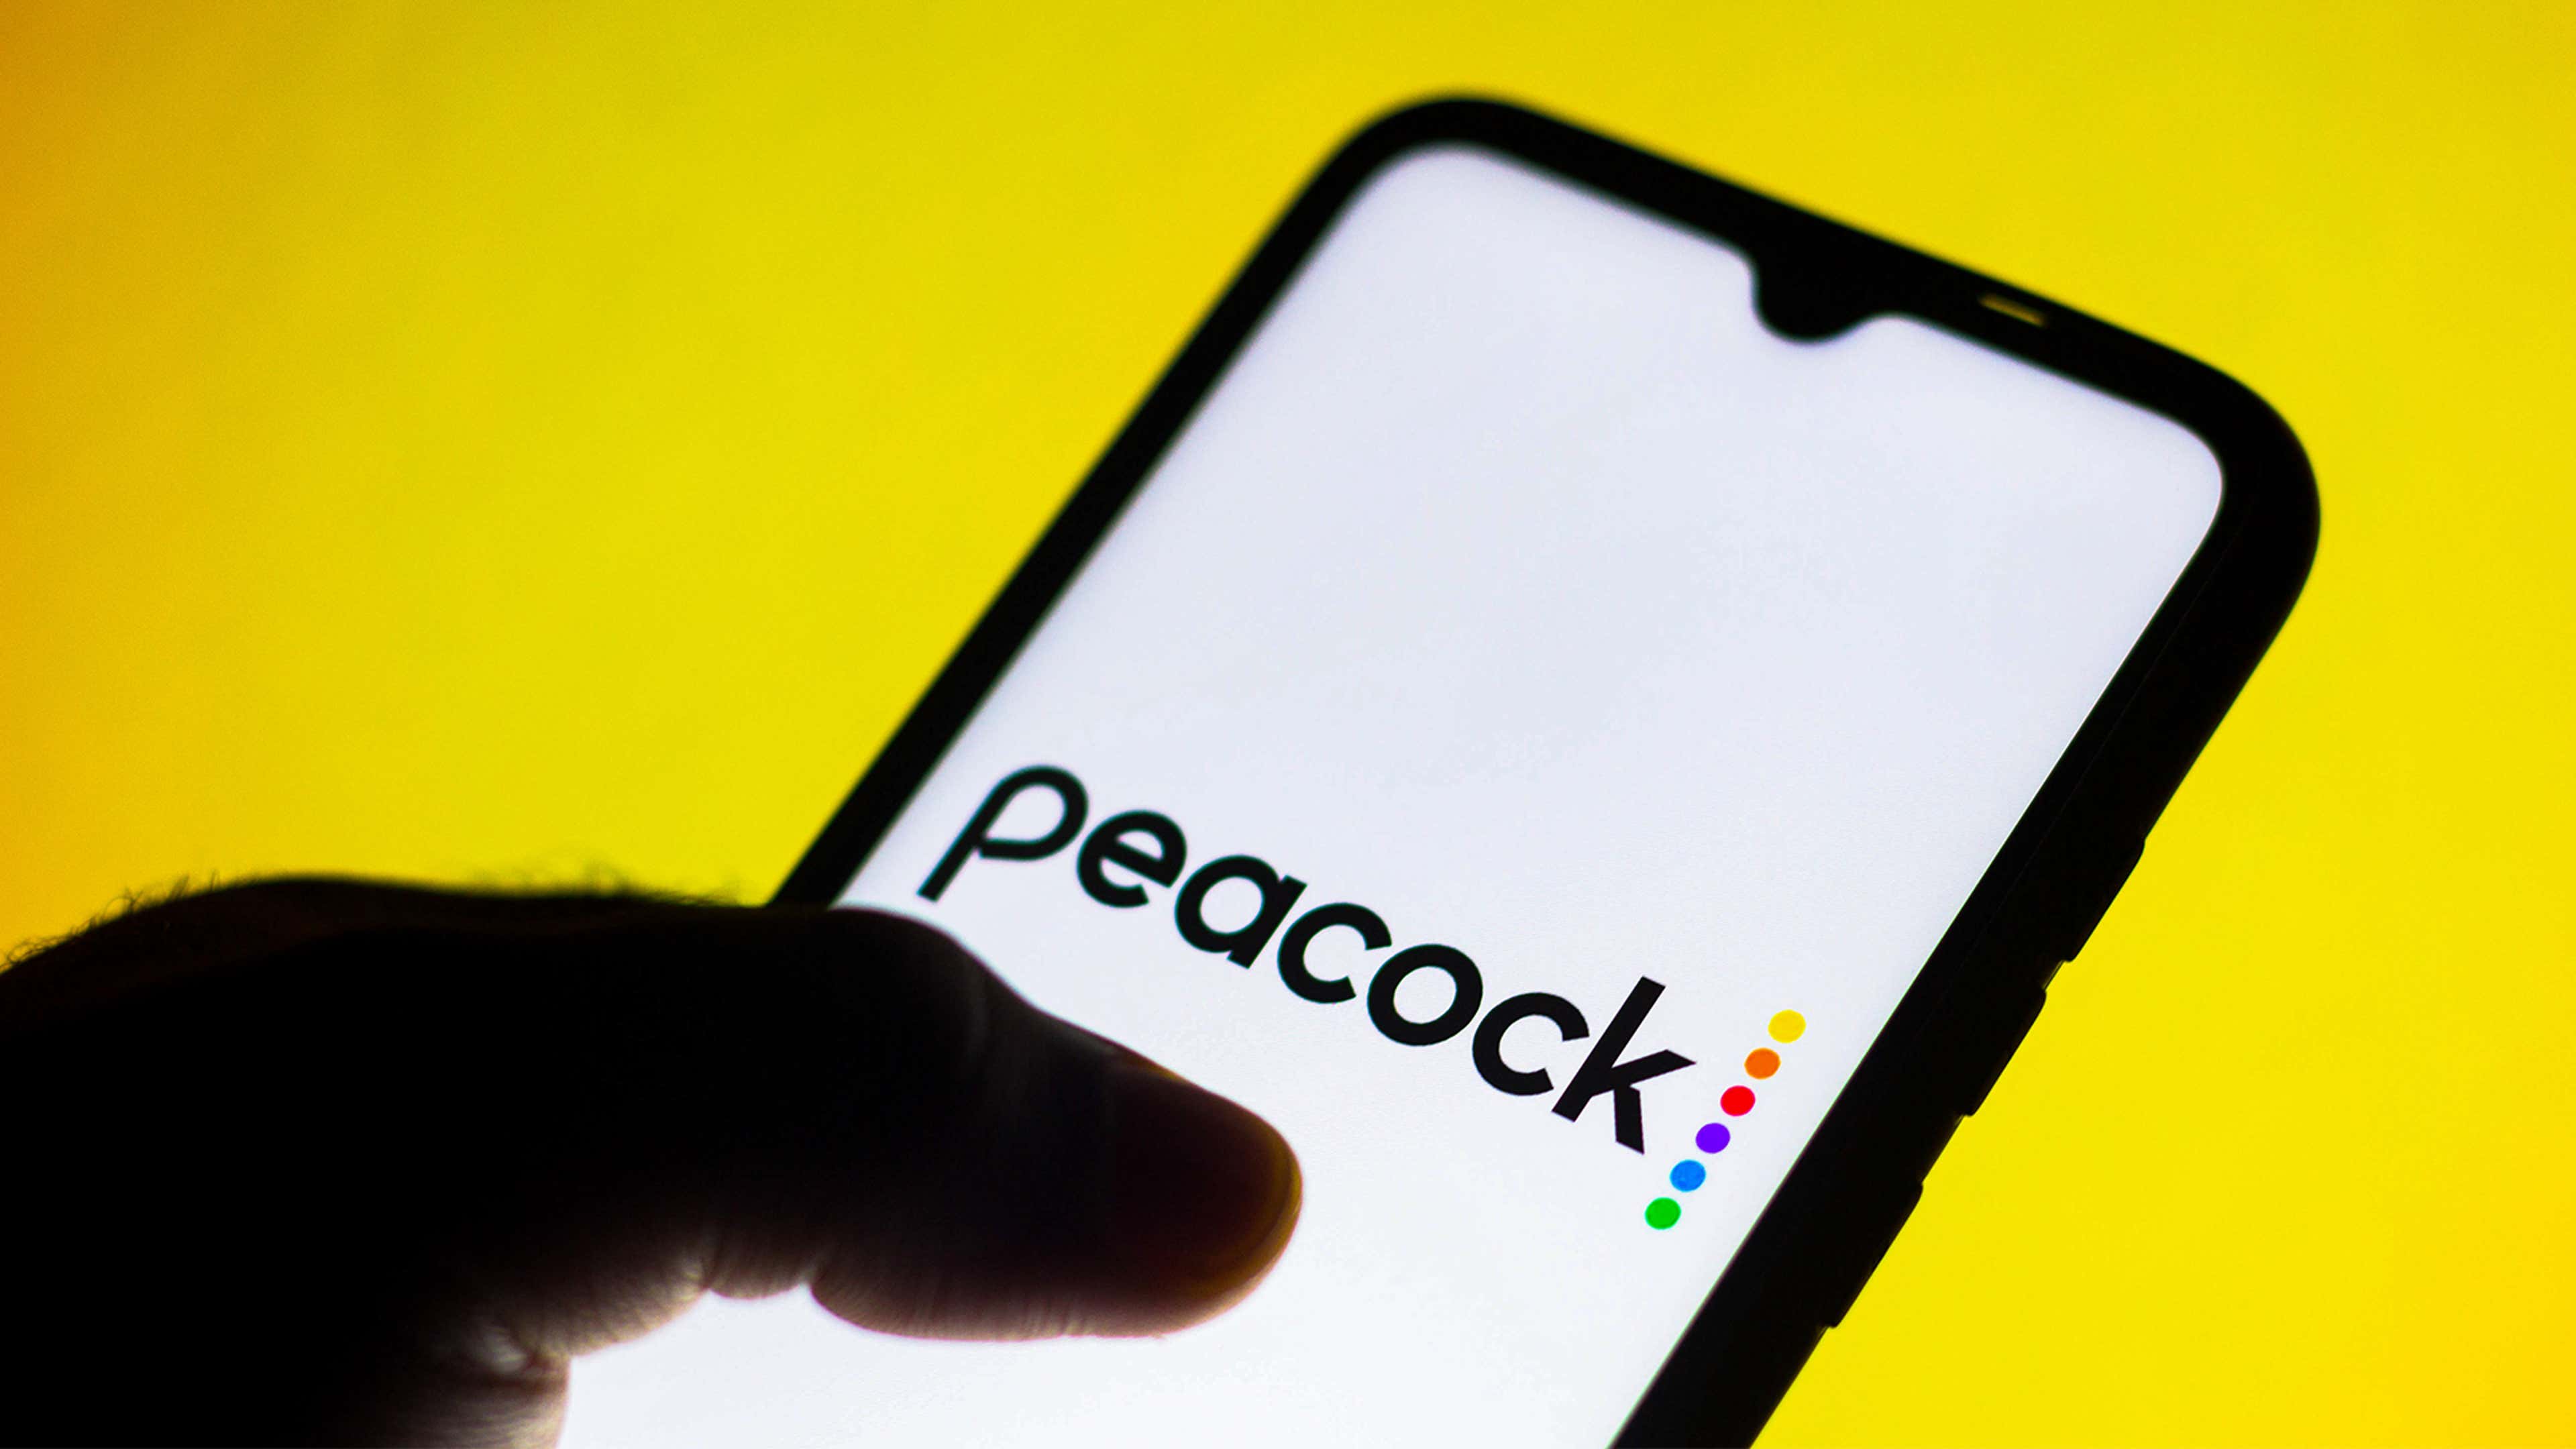 Peacock TV costs and plans 2024: Peacock Premium prices and deals